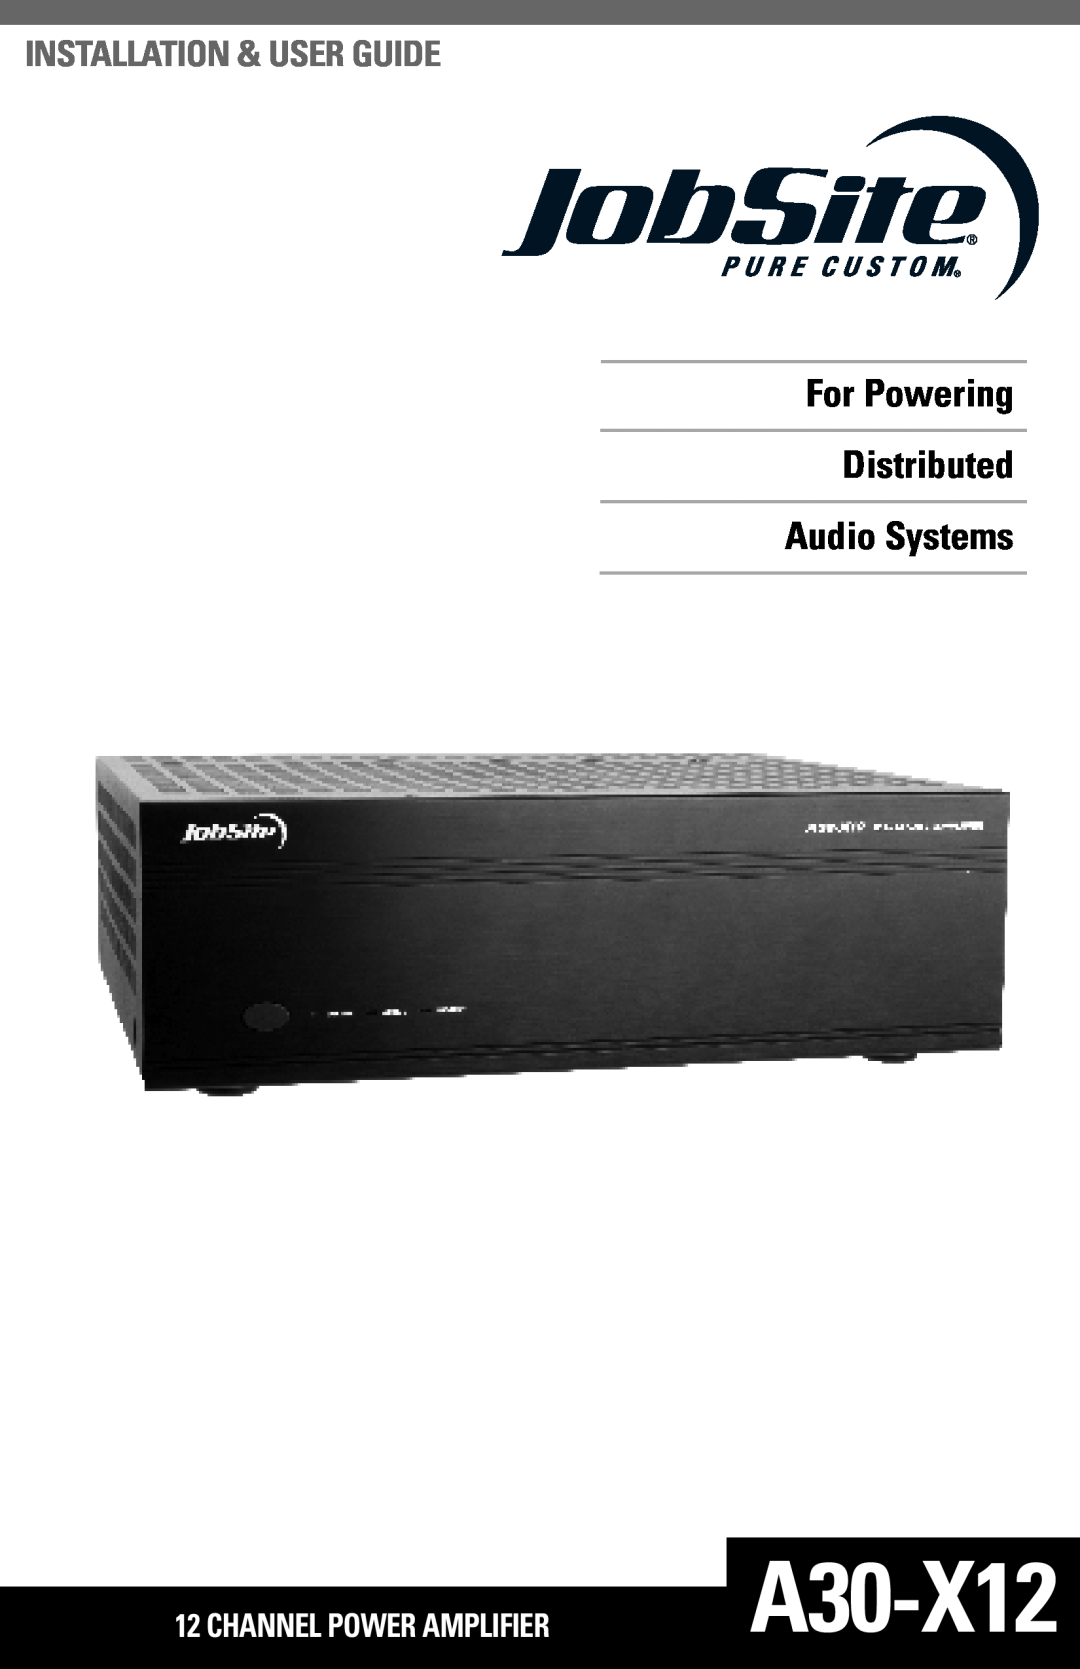 JobSite Systems A30-X12 manual For Powering Distributed Audio Systems, Installation & User Guide, Channel Power Amplifier 